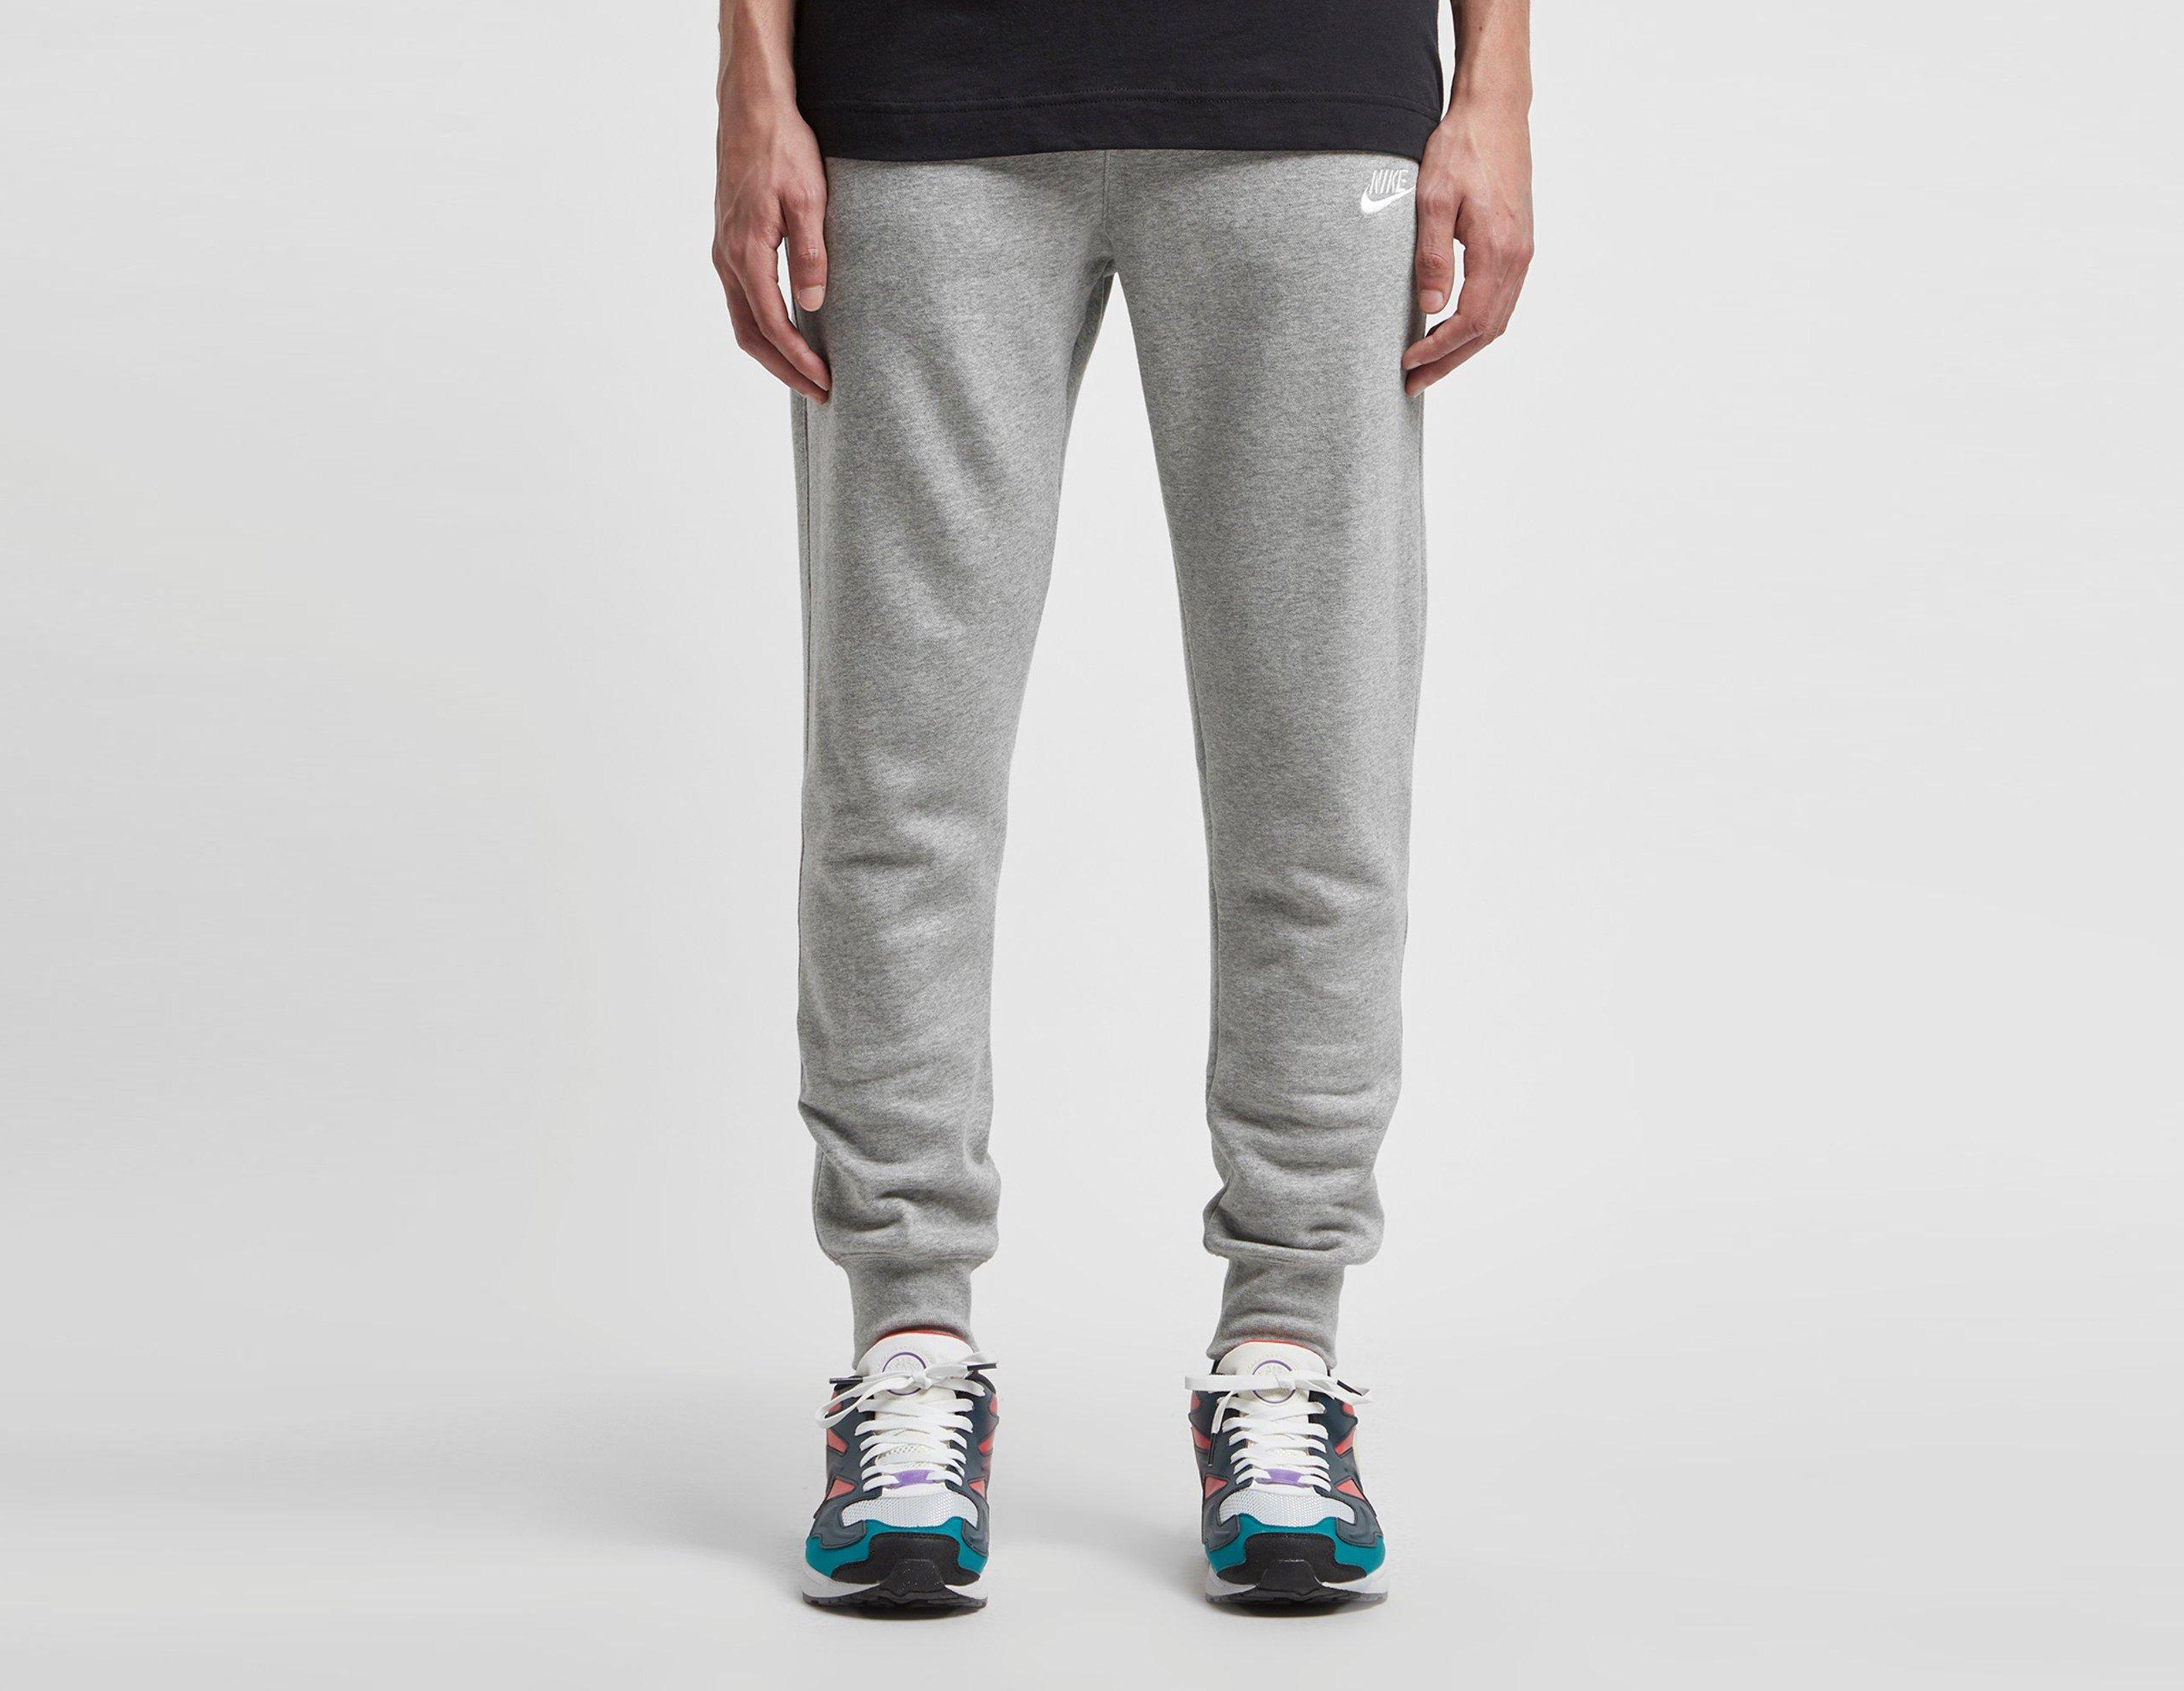 size? on Twitter: "The @Nike Foundation Fleece Joggers. Available online now: https://t.co/ilmvvLPA5L - #foundation #jogger https://t.co/SdUiyVnsjs" / Twitter